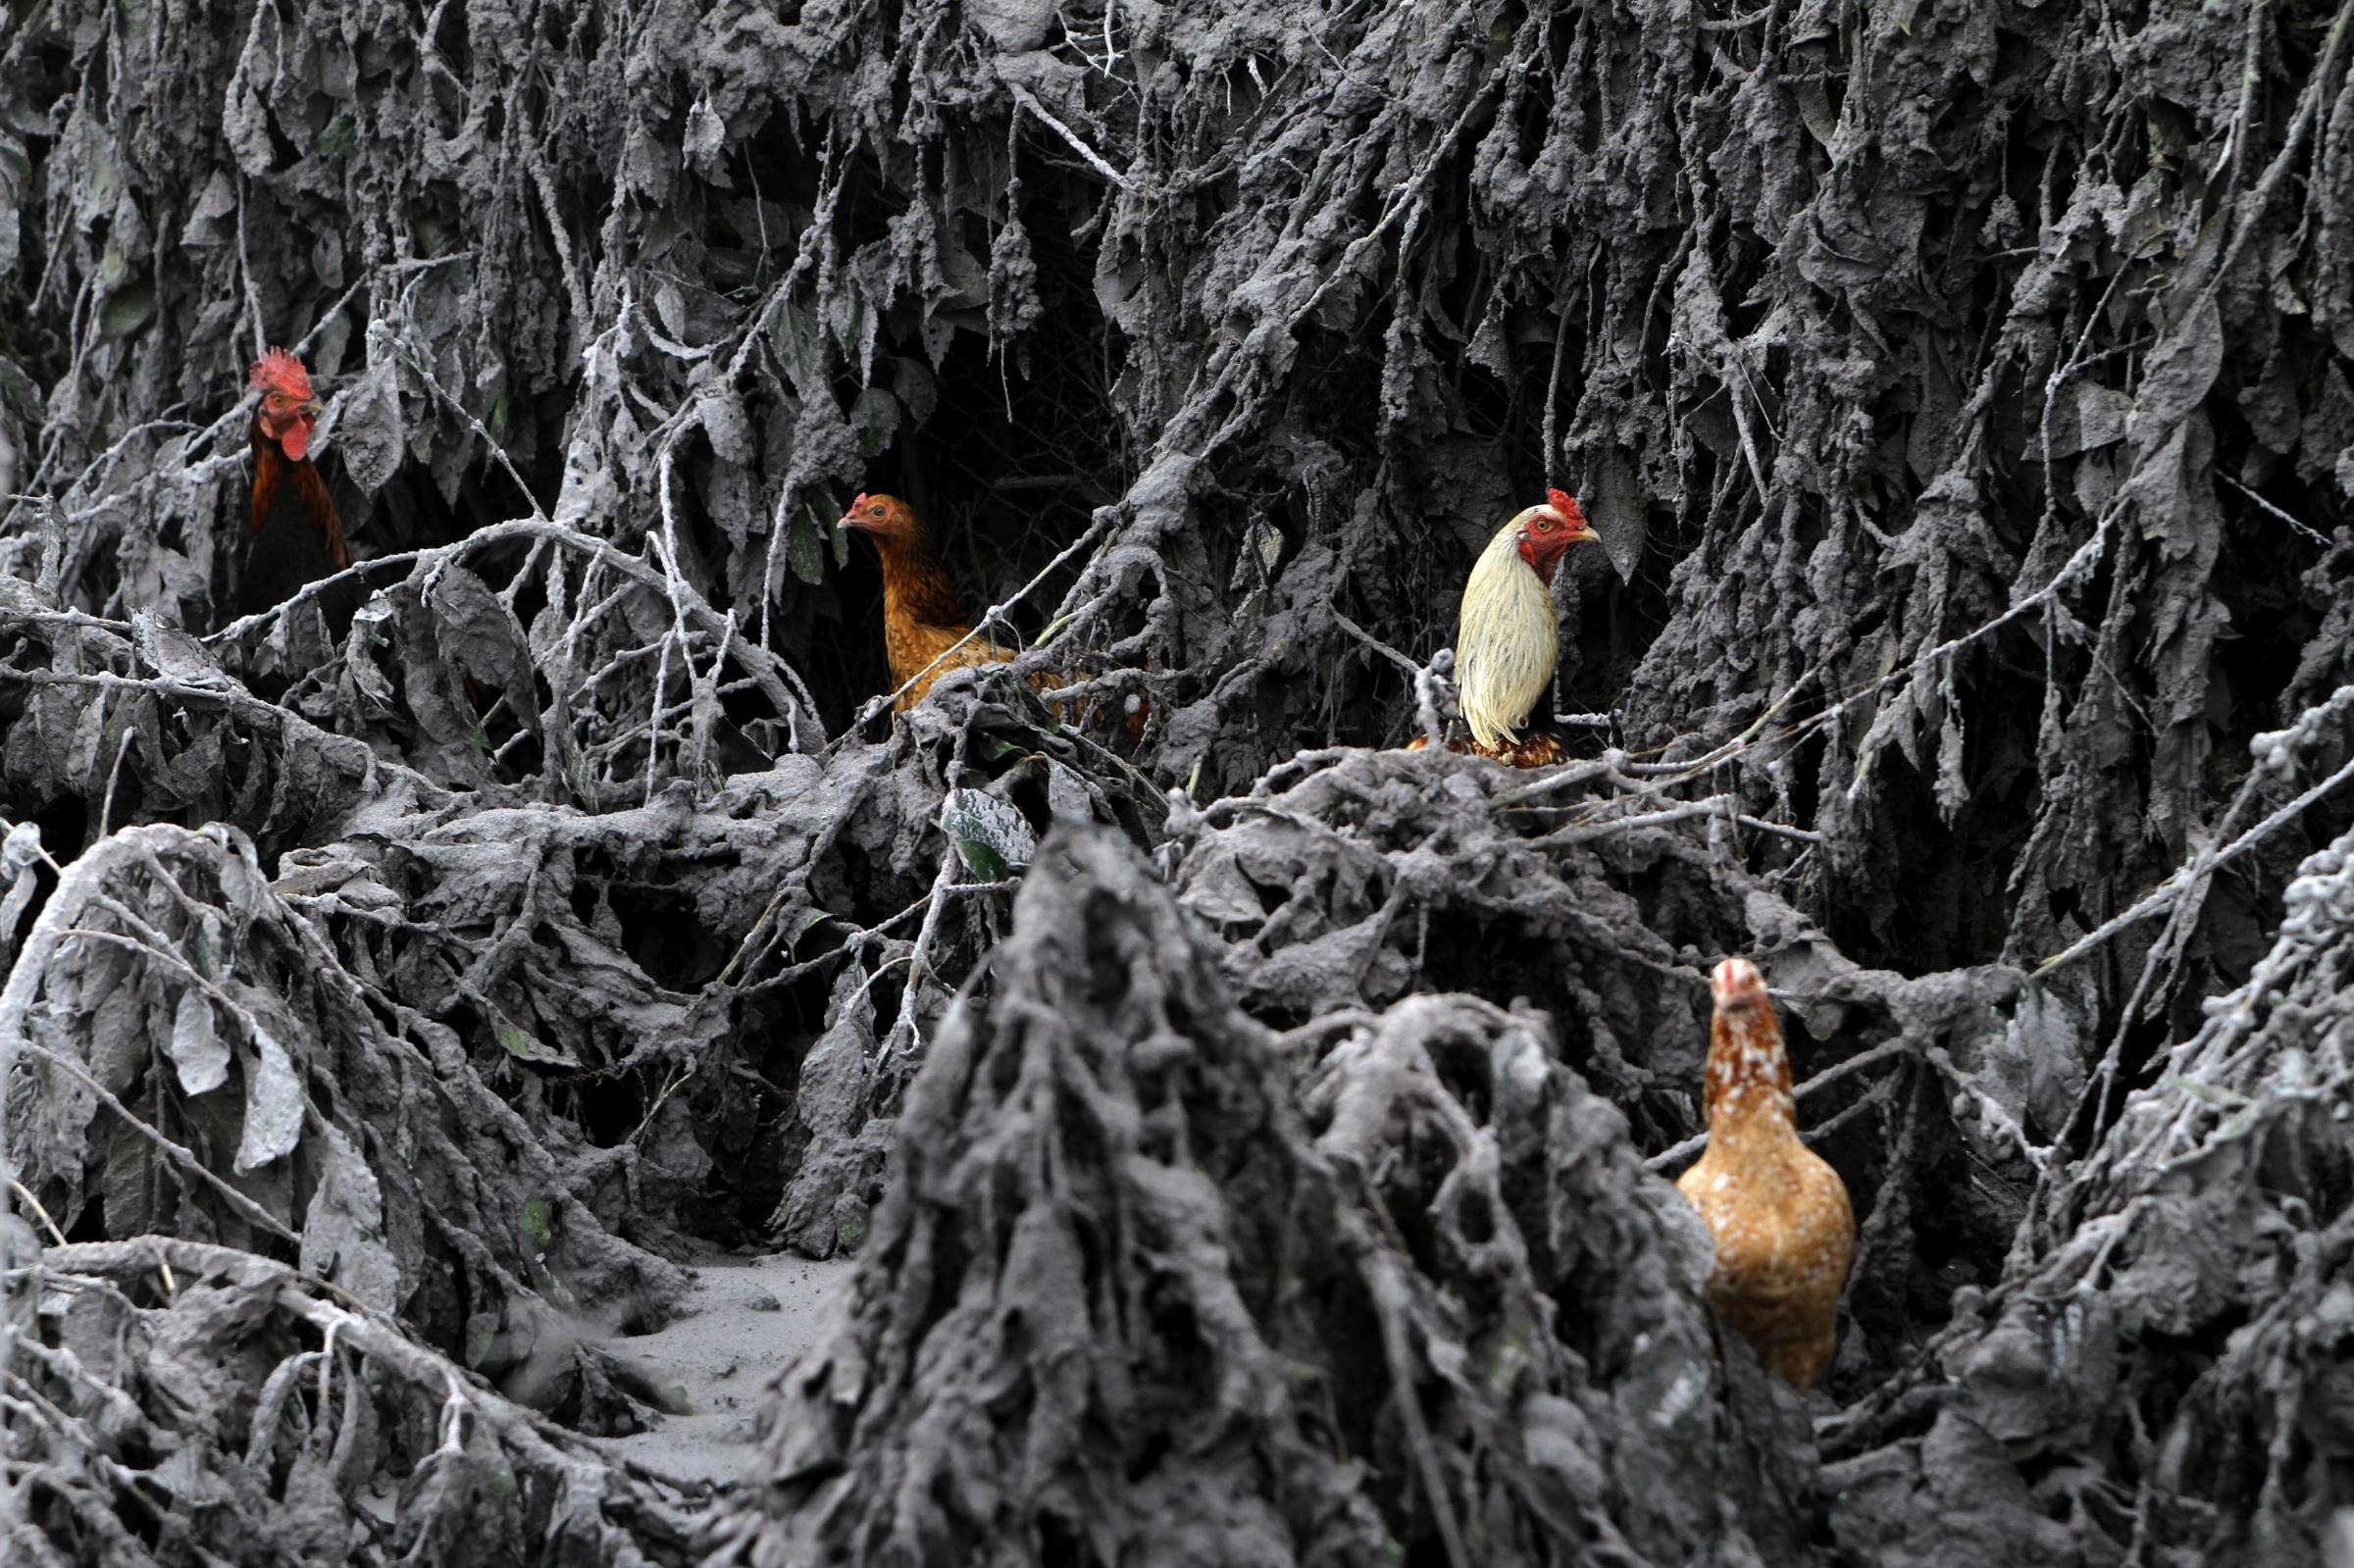 Chickens are seen in the midst of plants covered by ash from Mount Sinabung near Sigarang-Garang village in Karo district, Indonesia's North Sumatra province, Jan. 12, 2014.